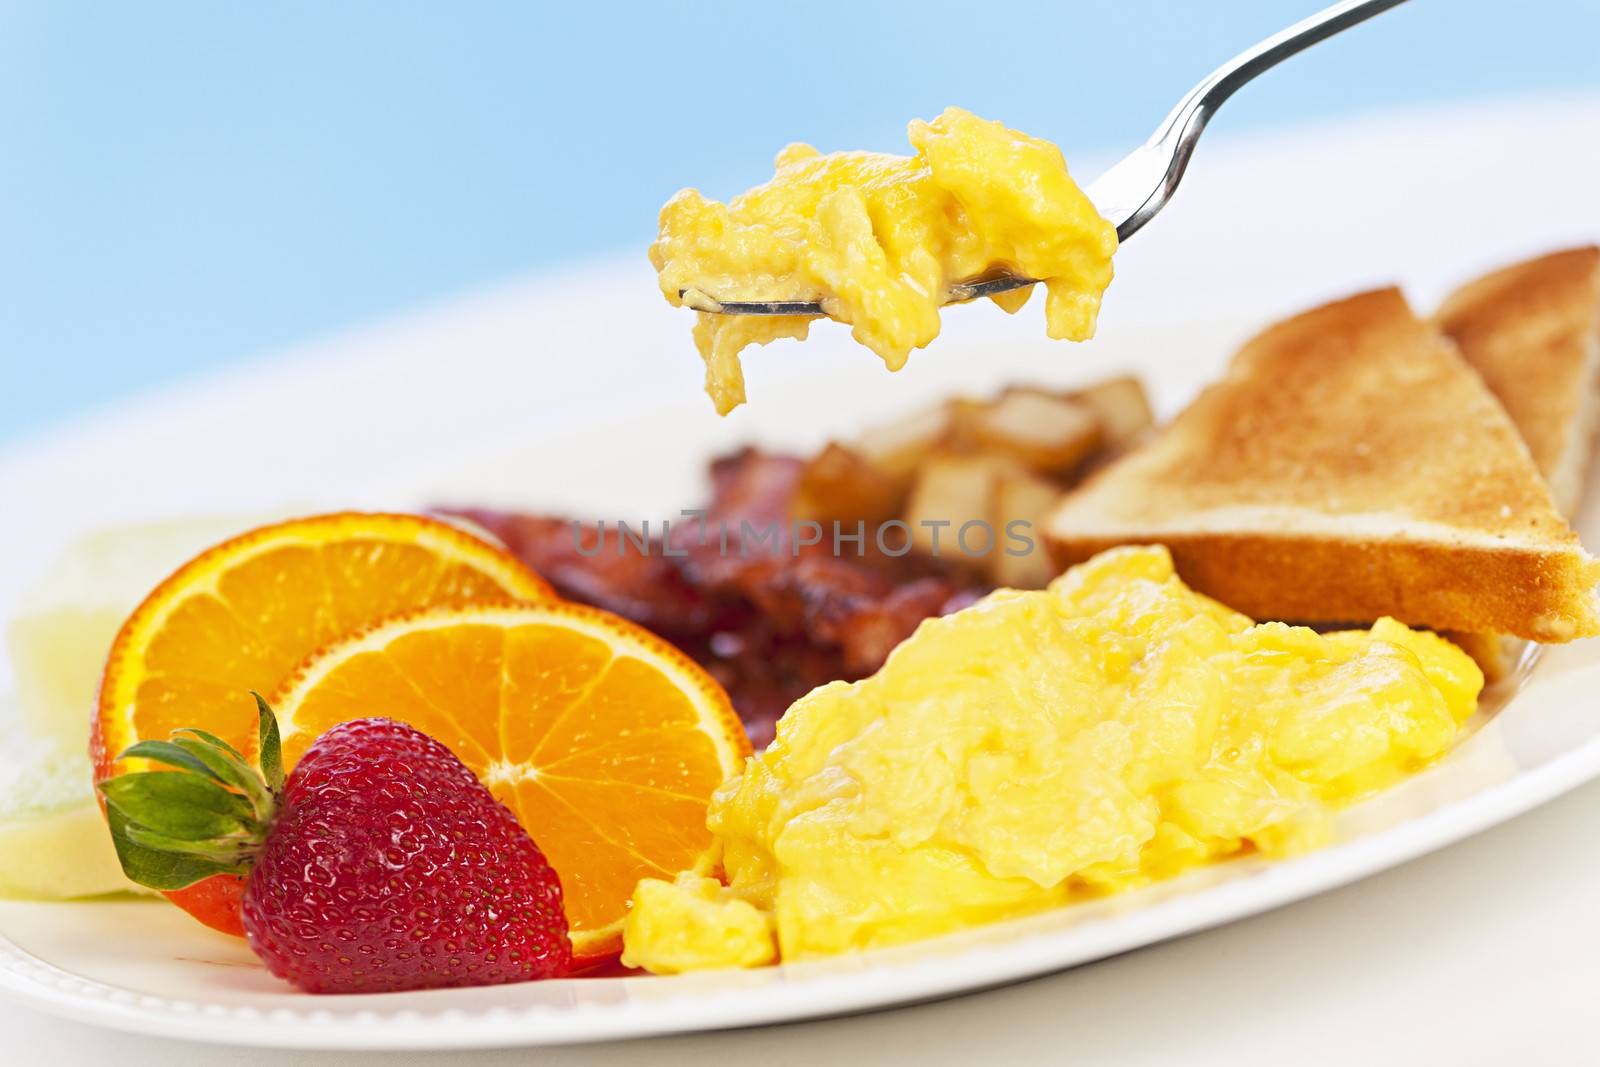 Scrambled eggs on a fork above breakfast plate with fruits toast and bacon